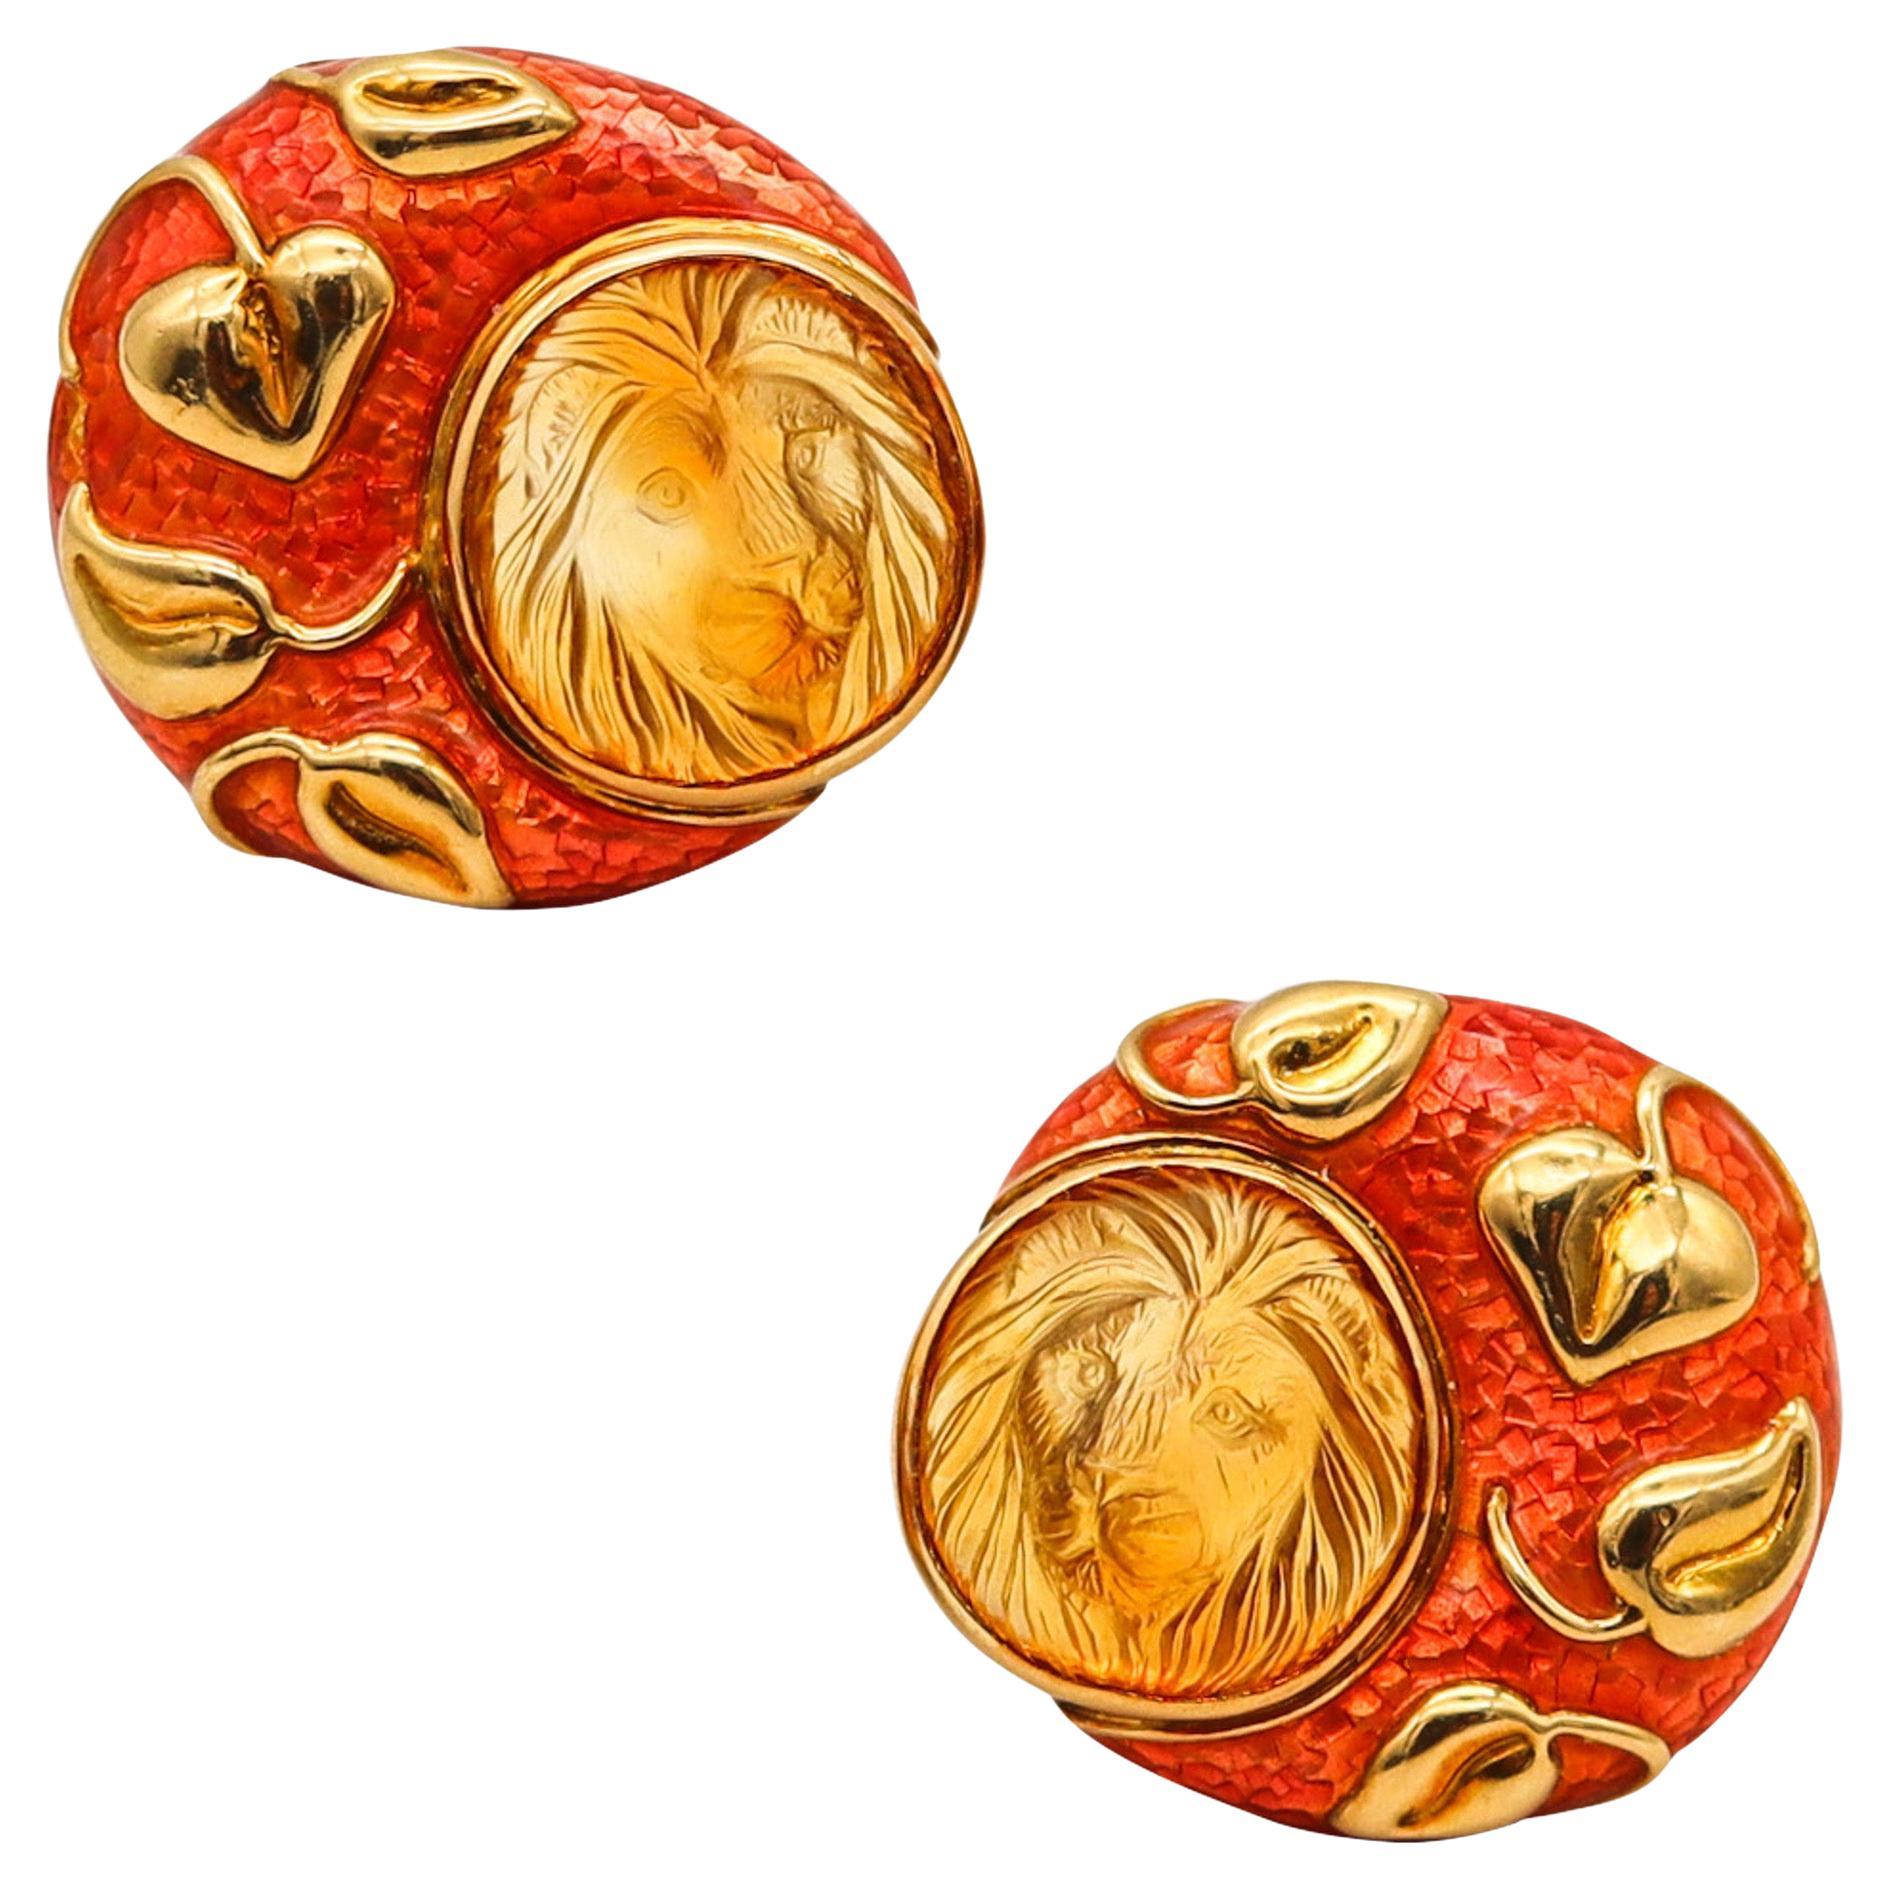 Elizabeth Gage 1993 London Enameled Lions Clips Earrings 18Kt Gold With Citrines For Sale